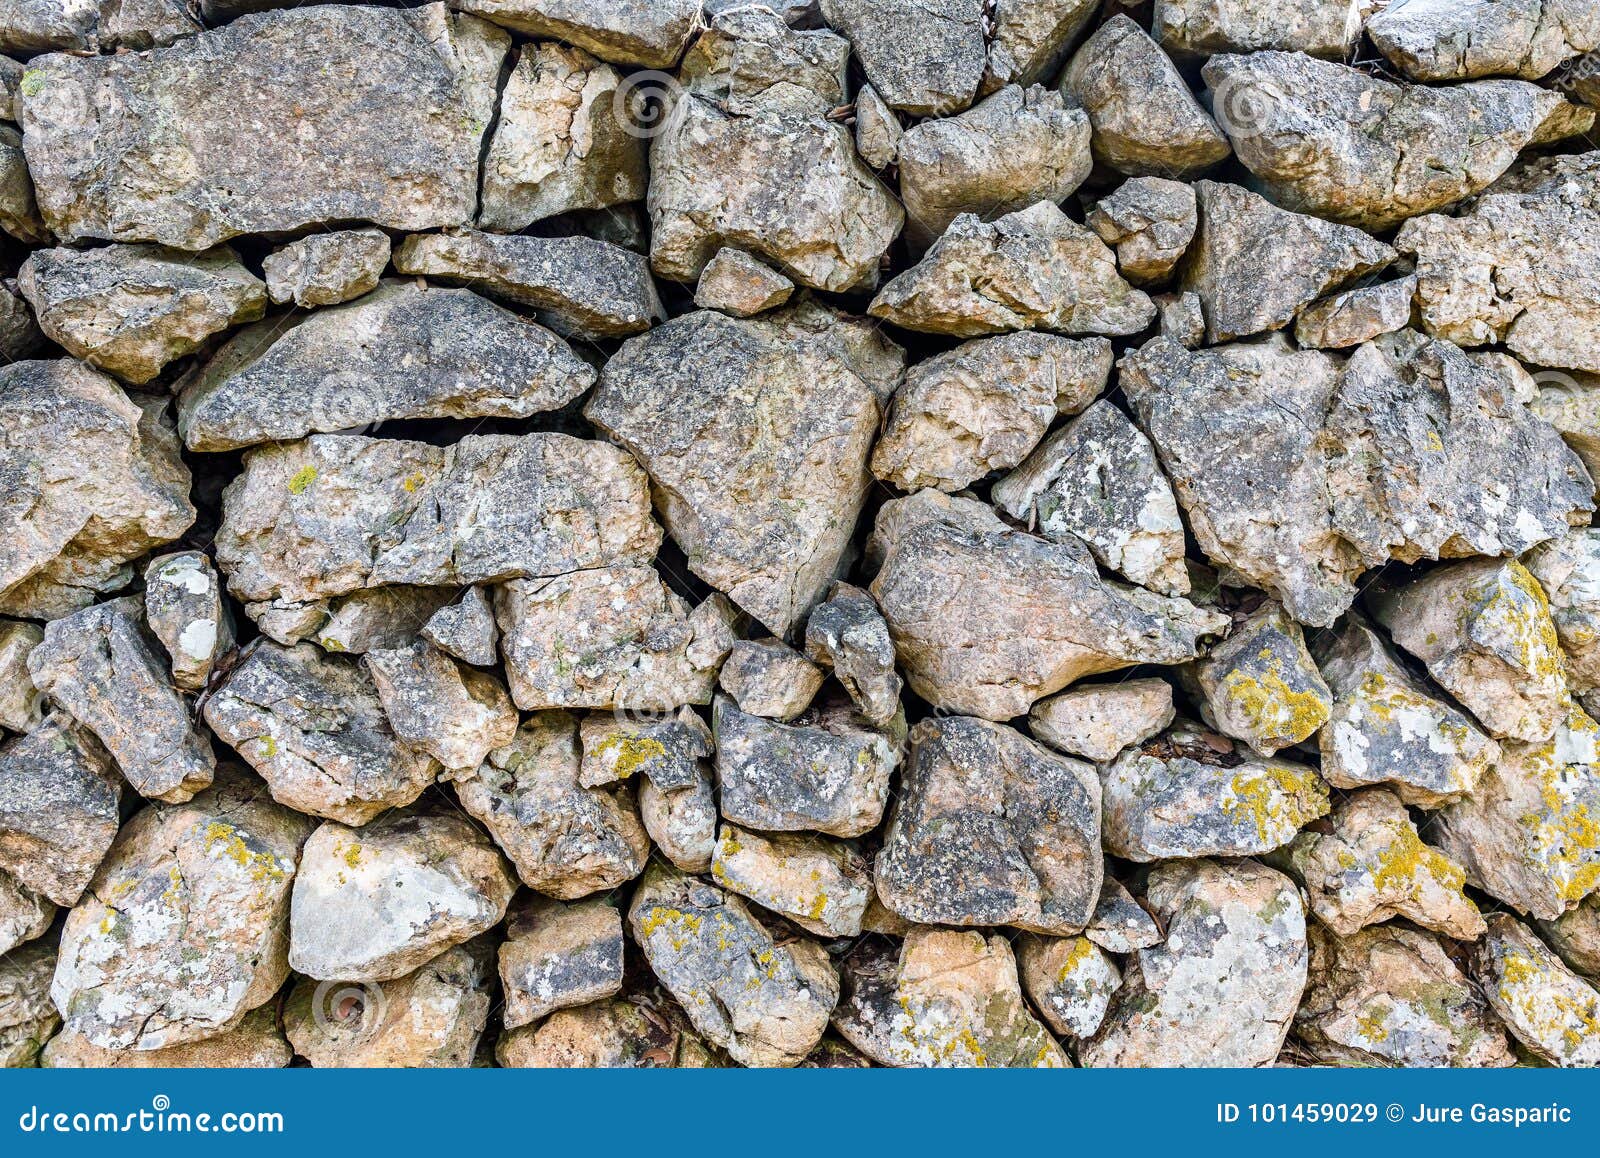 stone rock fence or gabion wall texture.